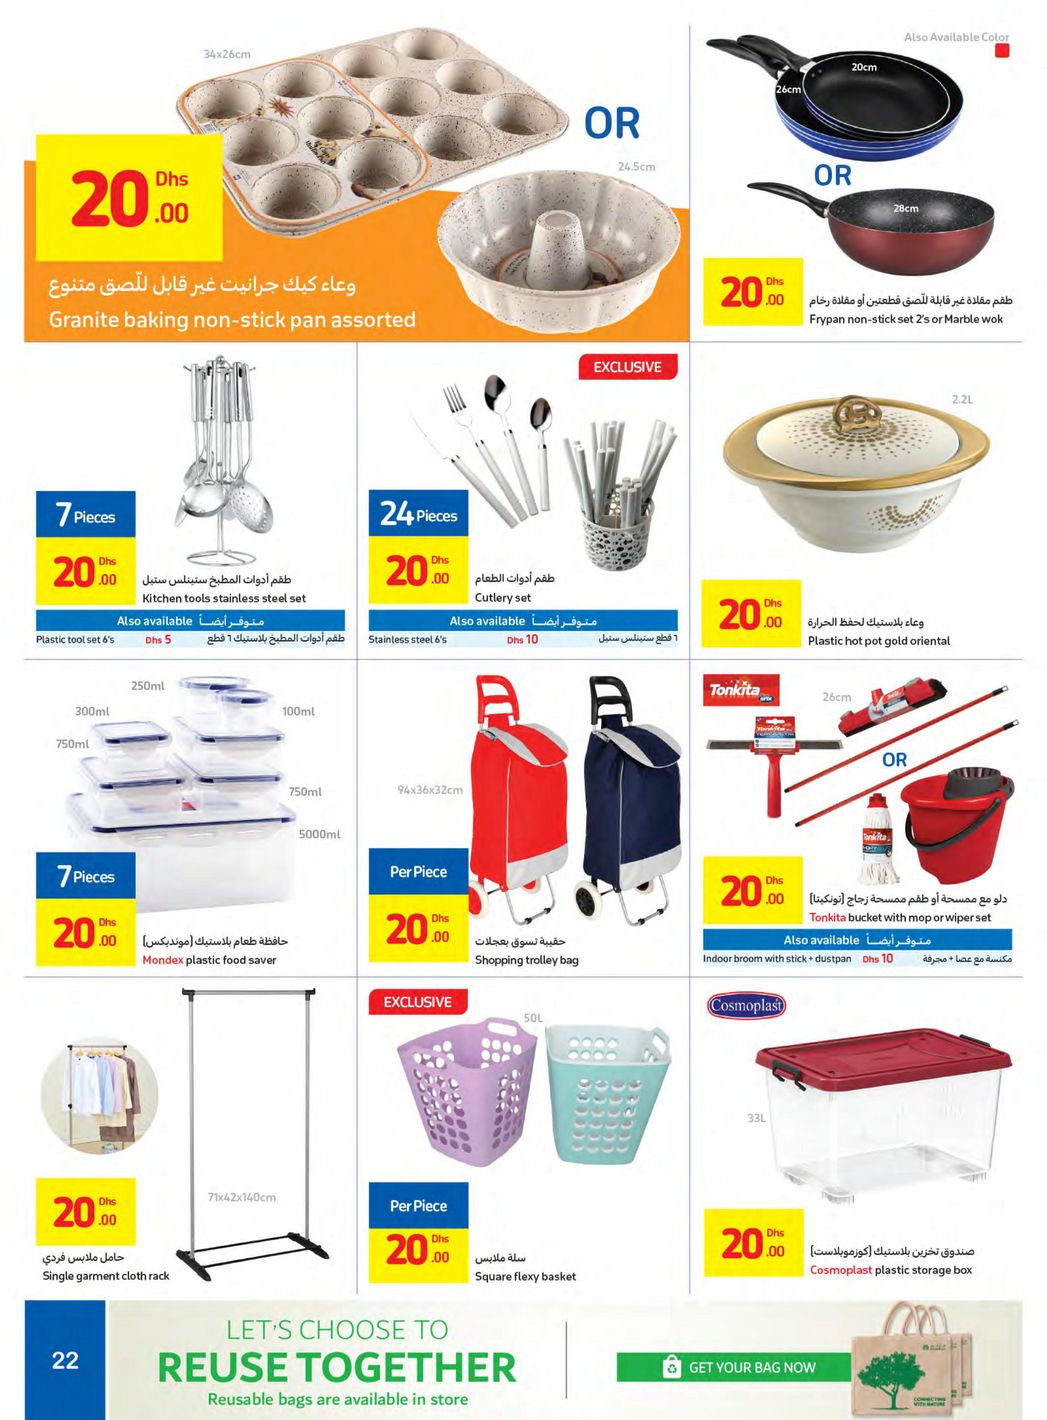 Carrefour Offers from 13/2 till 23/2 | Carrefour UAE 23